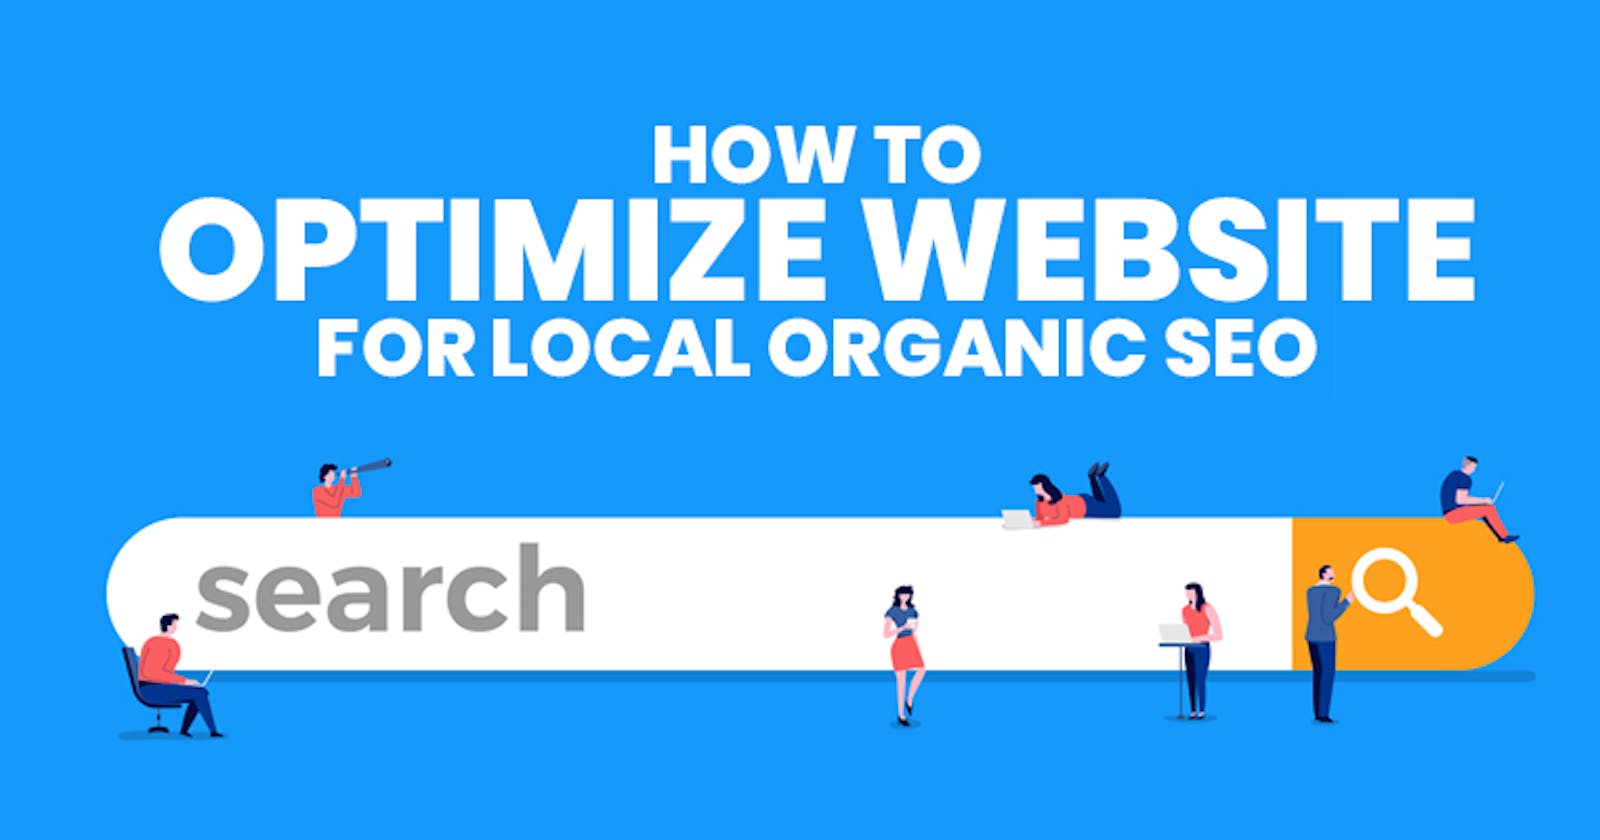 How to Optimize website for Local Organic SEO